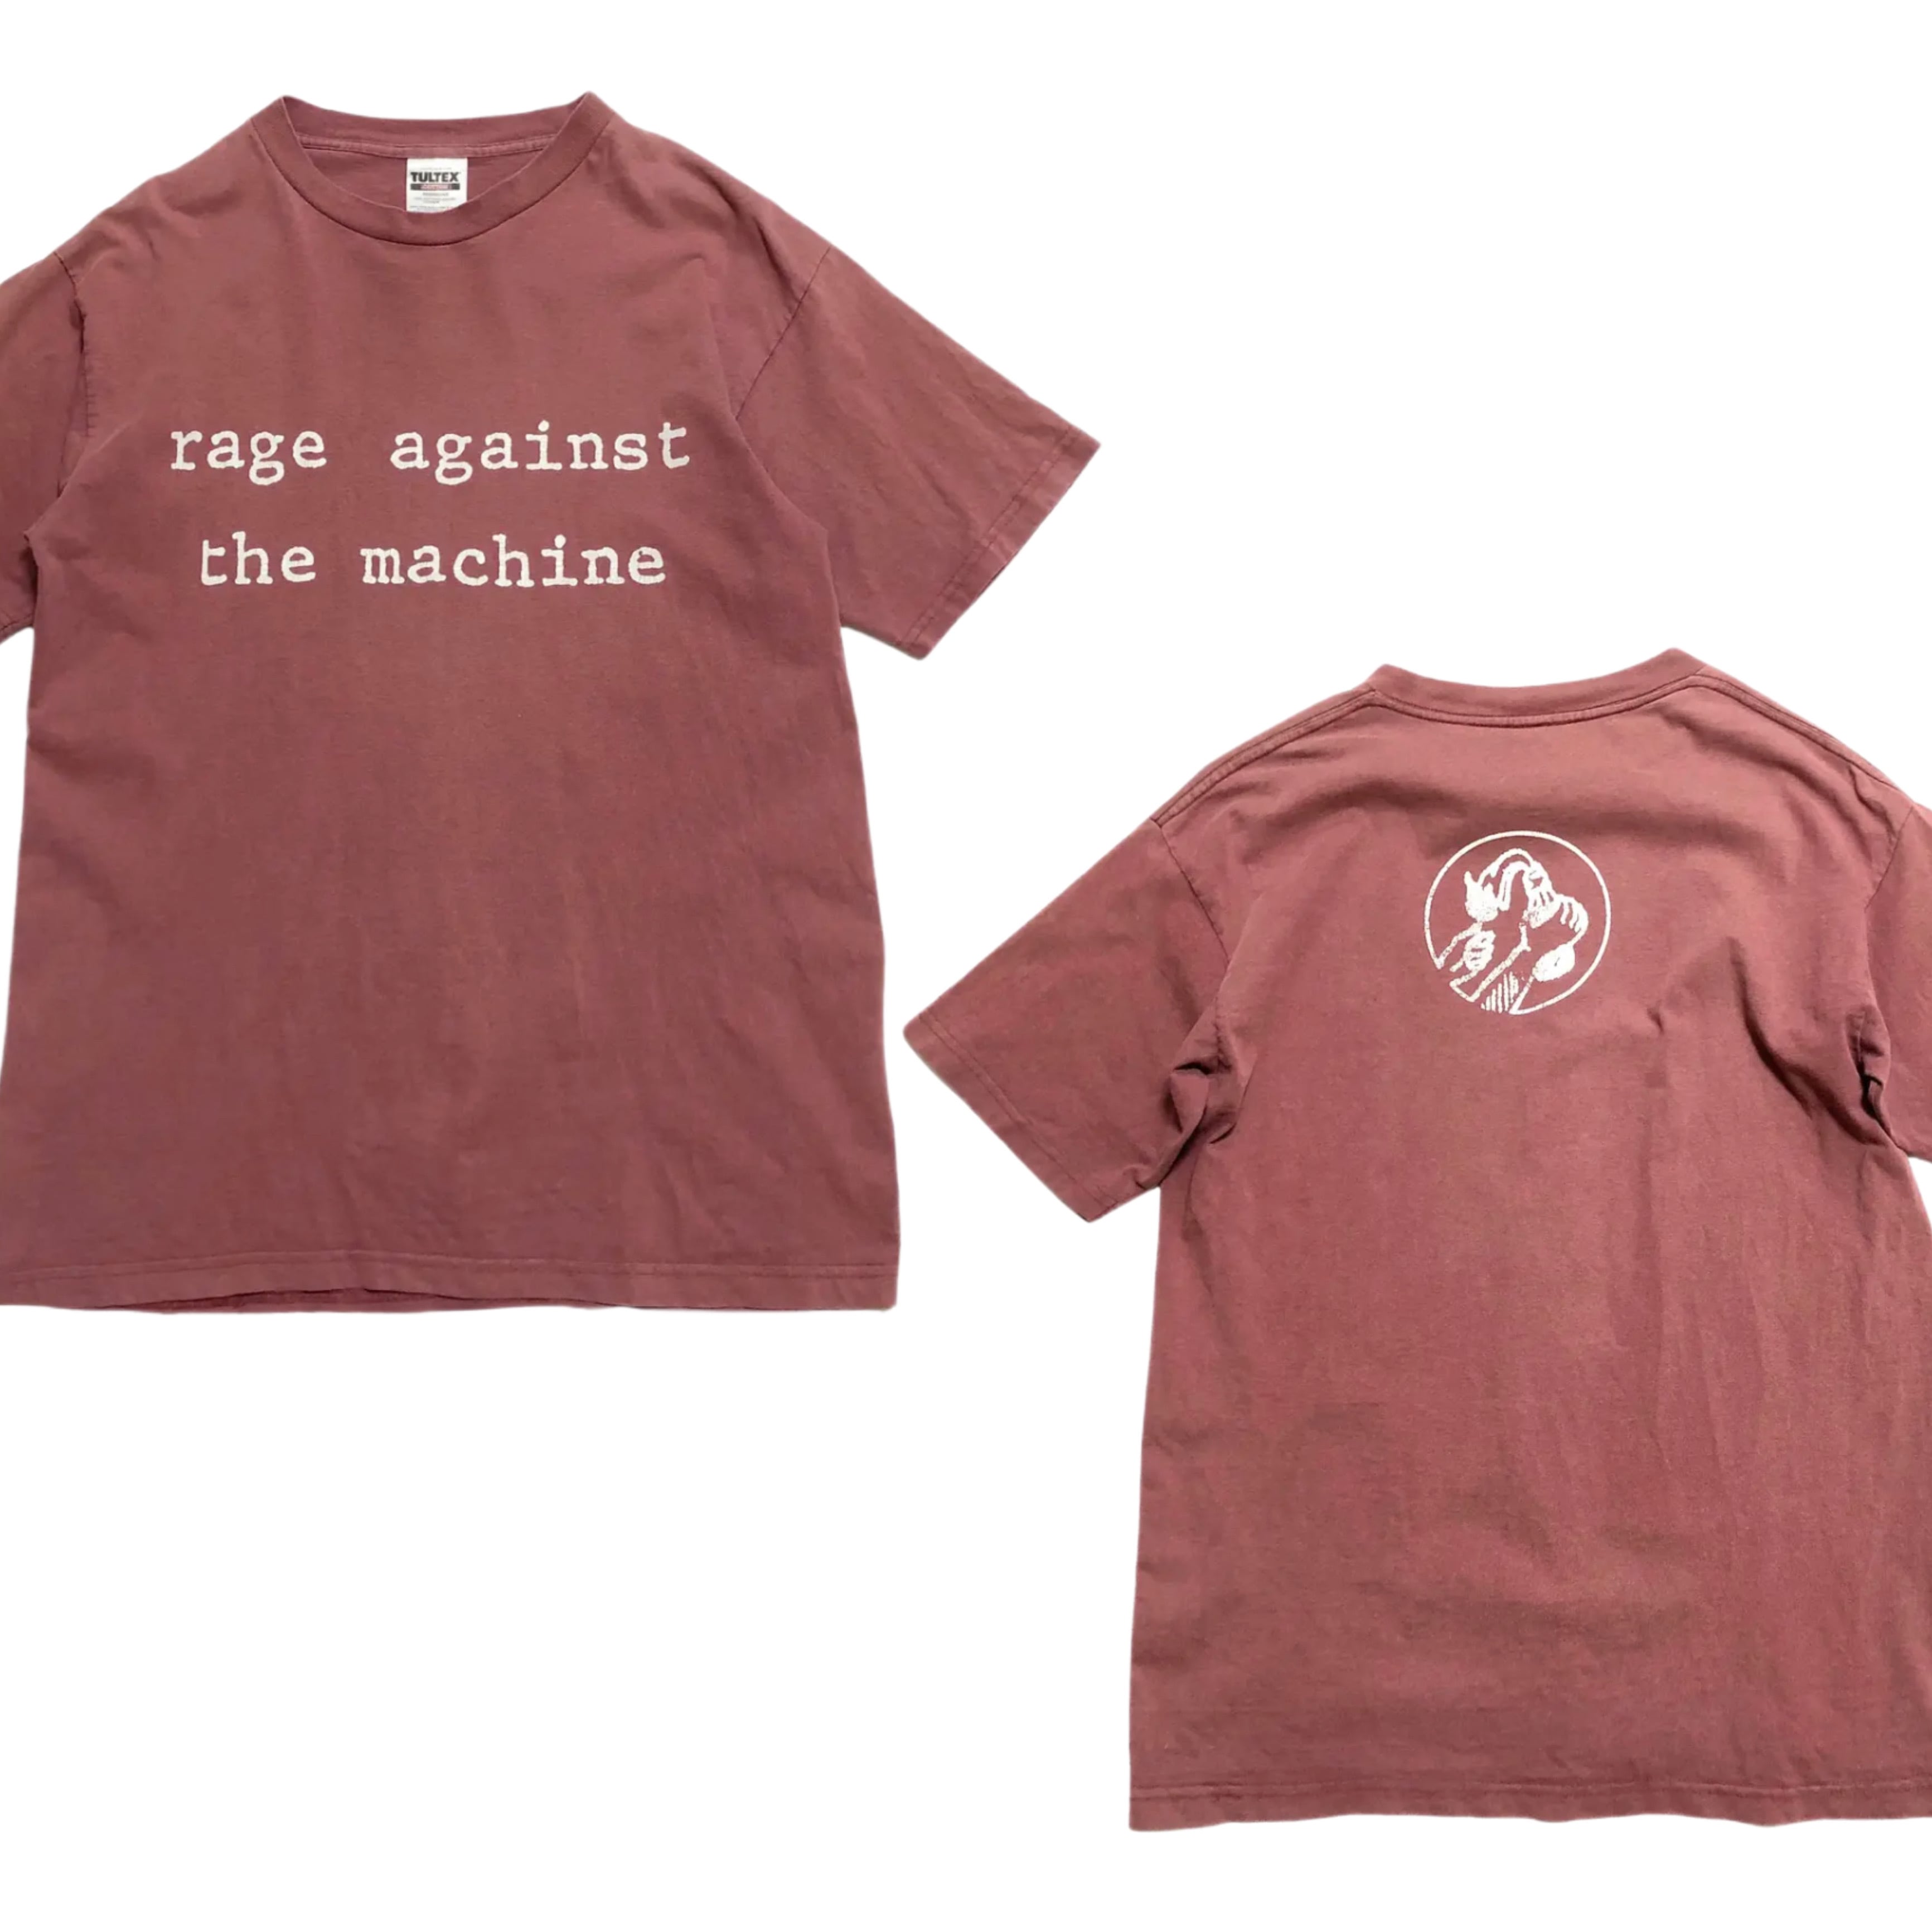 90s RAGE AGAINST THE MACHINE 火炎瓶 Tシャツ TULTEX 【Ｌ】レイジアゲインストザマシーン | BACK IN  THE DAYZ. powered by BASE